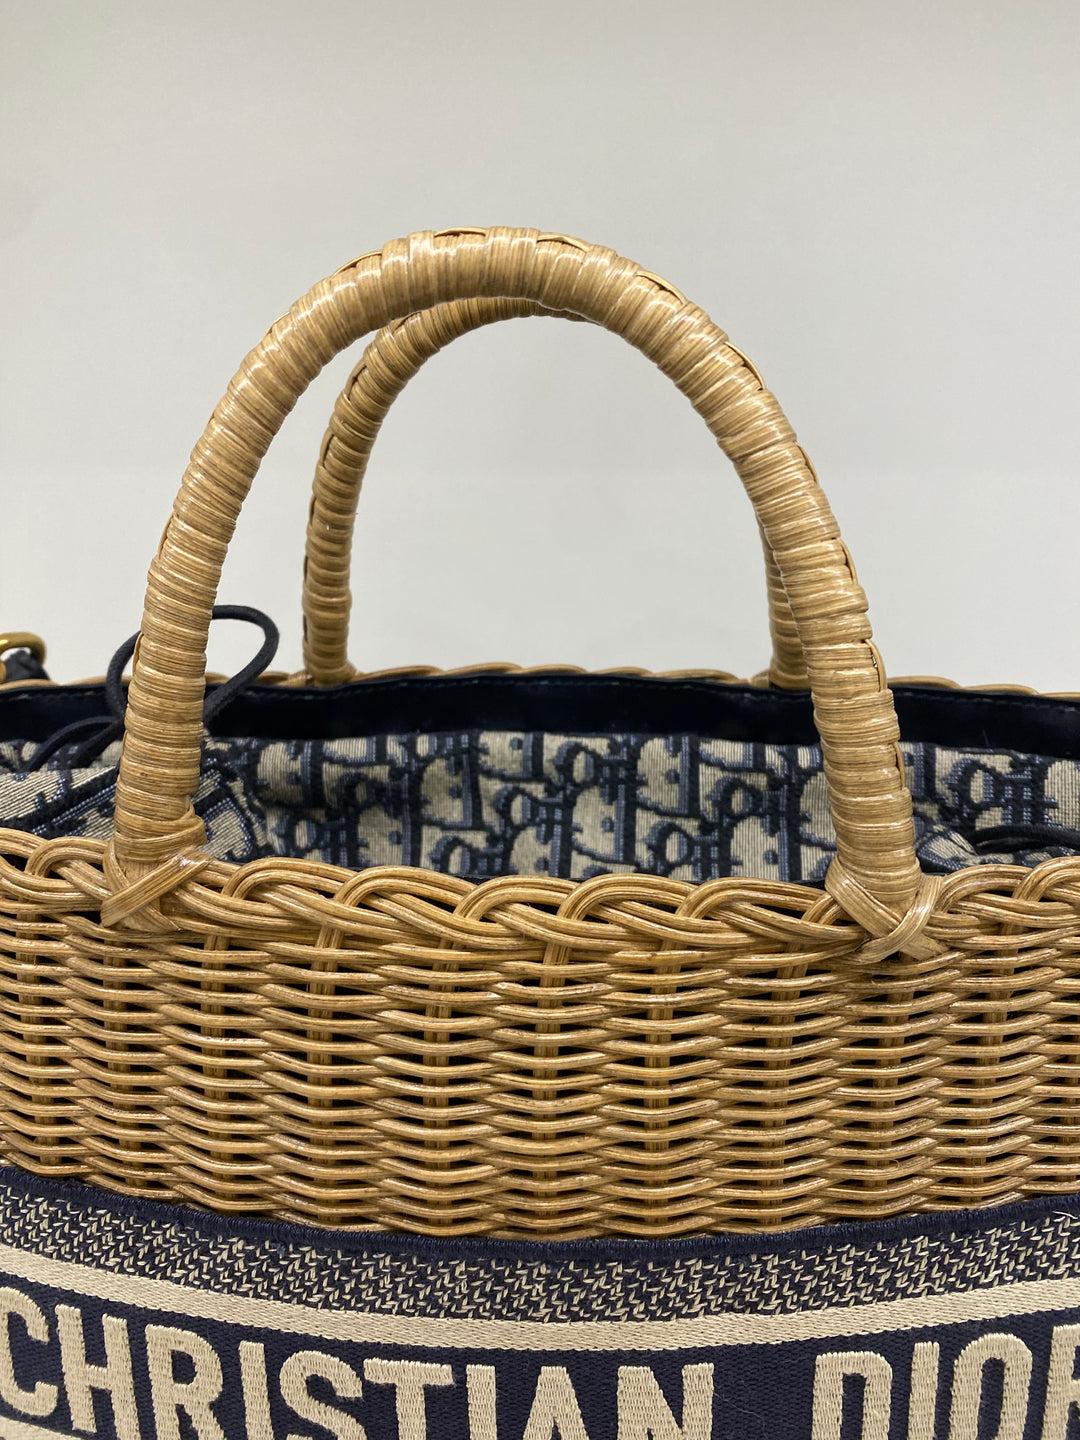 Christian Dior Wicker Bag For Sale 1